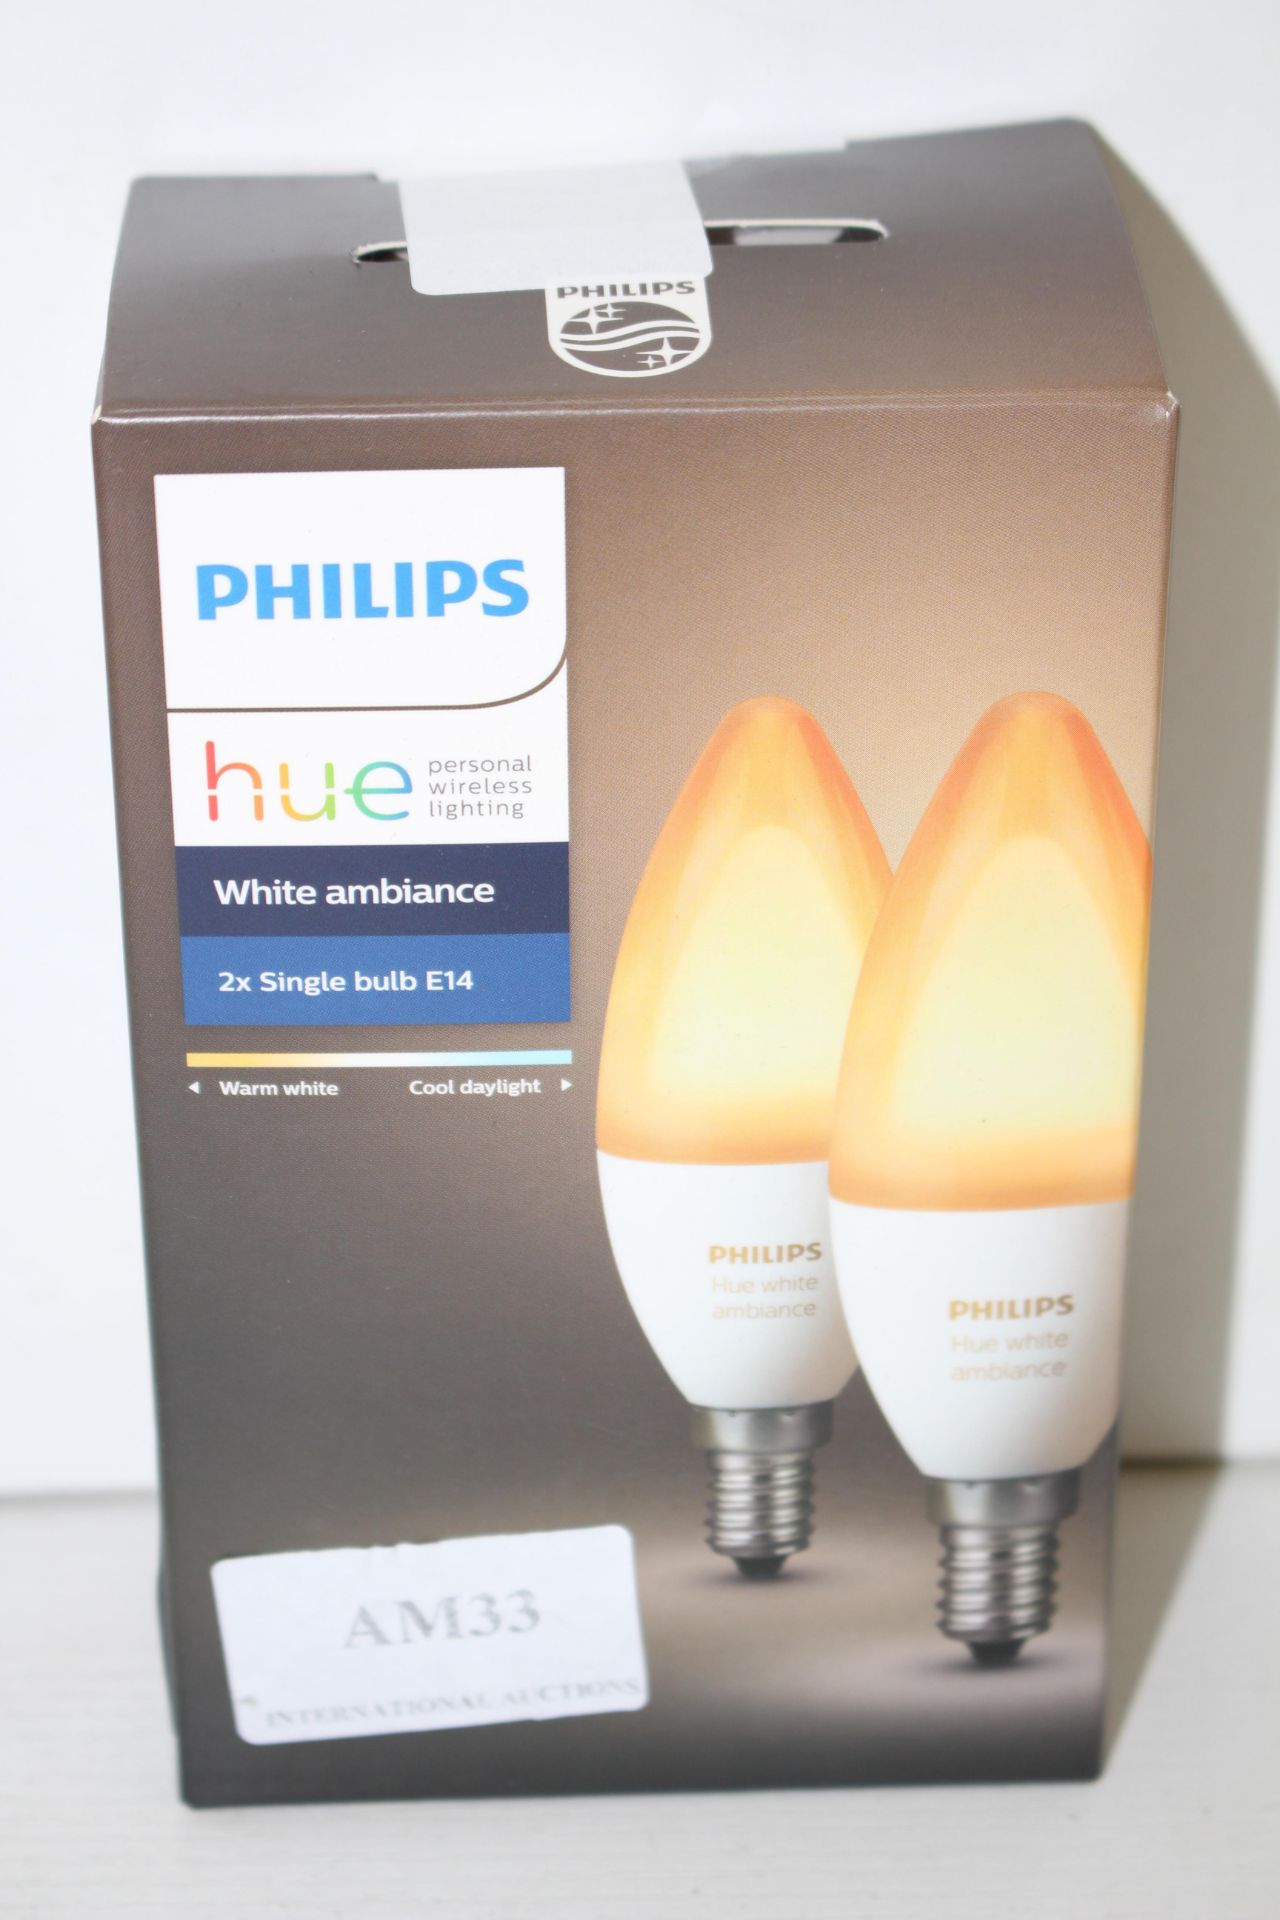 BOXED PHILIPS PERSONAL WIRELESS LIGHTING WHITE AMBIANCE 2X SINGLE BULB E14Condition